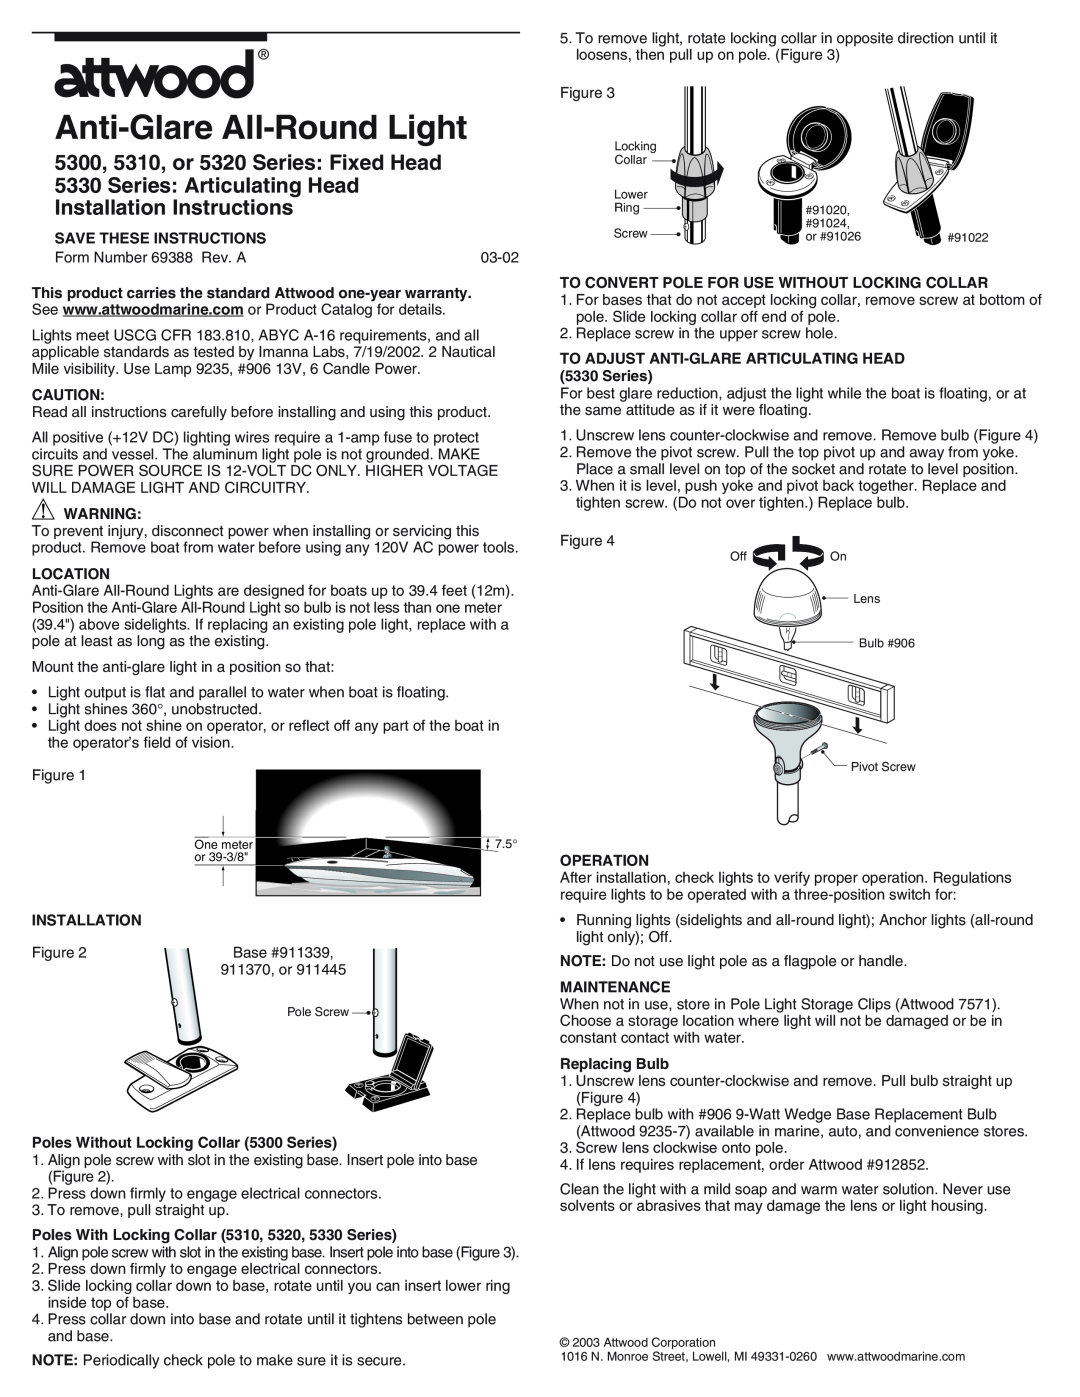 Attwood 5330 installation instructions Anti-Glare All-Round Light, 5300, 5310, or 5320 Series Fixed Head 